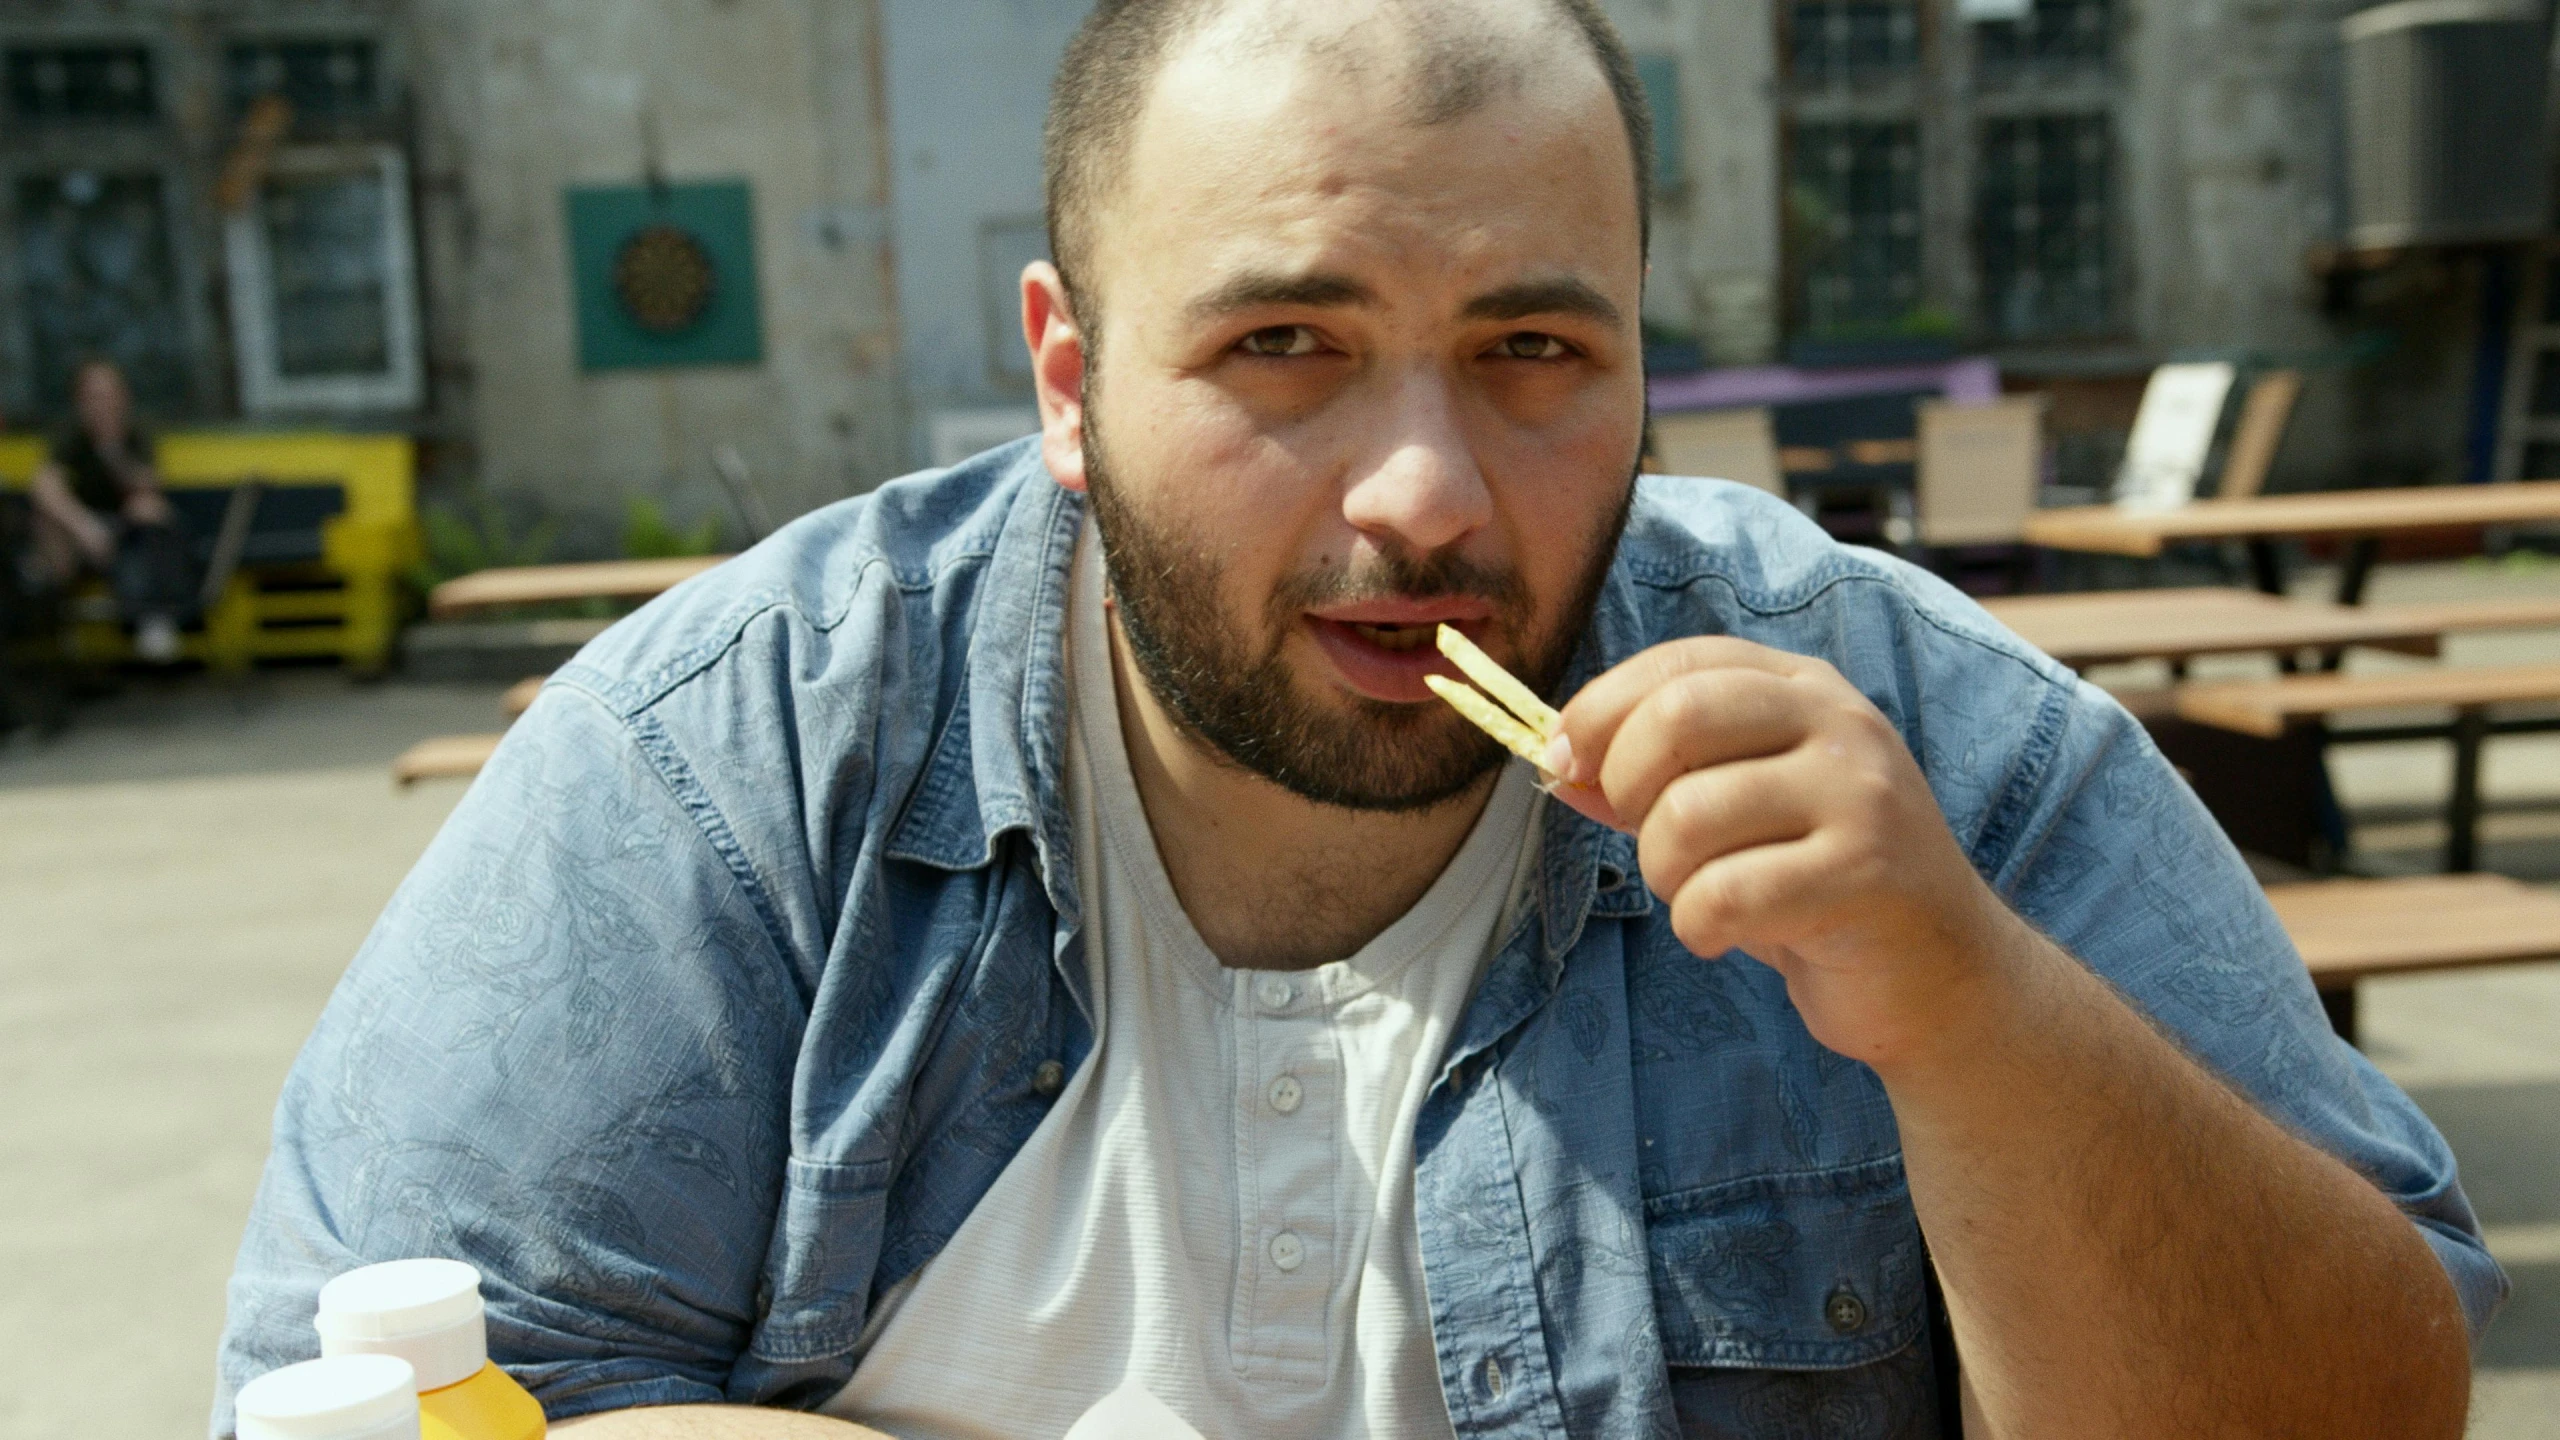 a man sitting at a table with chopsticks in his mouth, inspired by Nabil Kanso, pexels contest winner, les nabis, jontron, square, middle eastern, vadim voitekhovitch